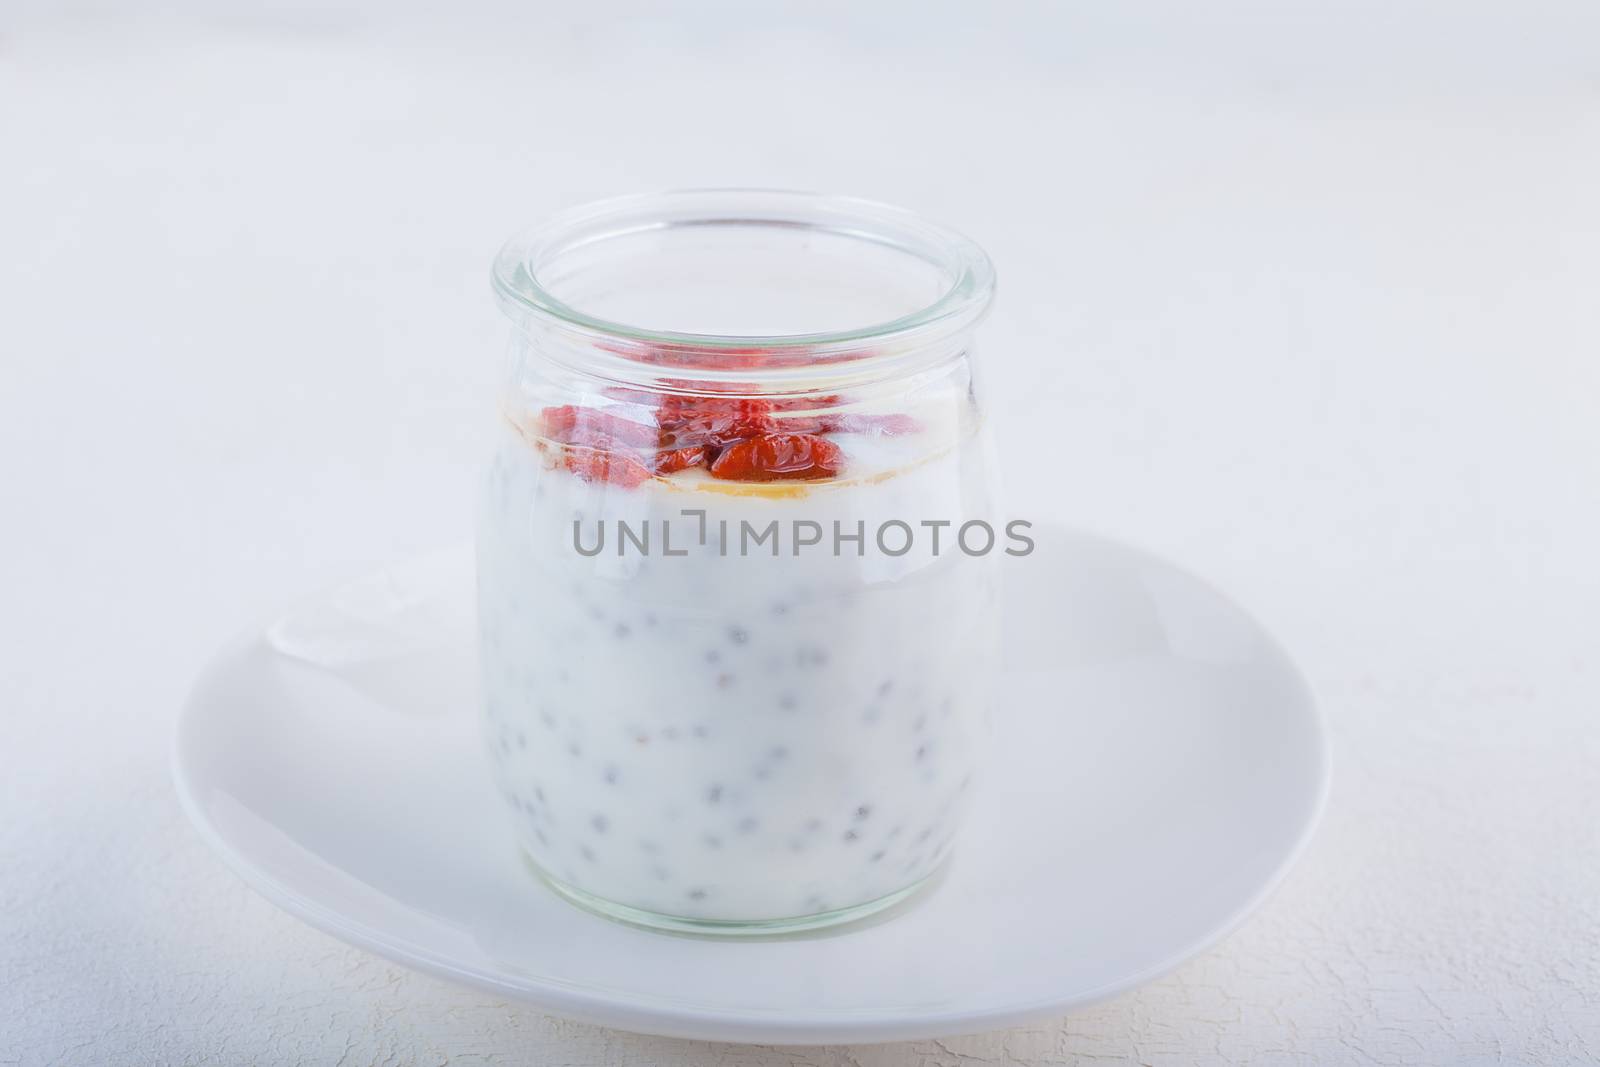 Yoghurt with goji berries, chia seeds and honey by supercat67